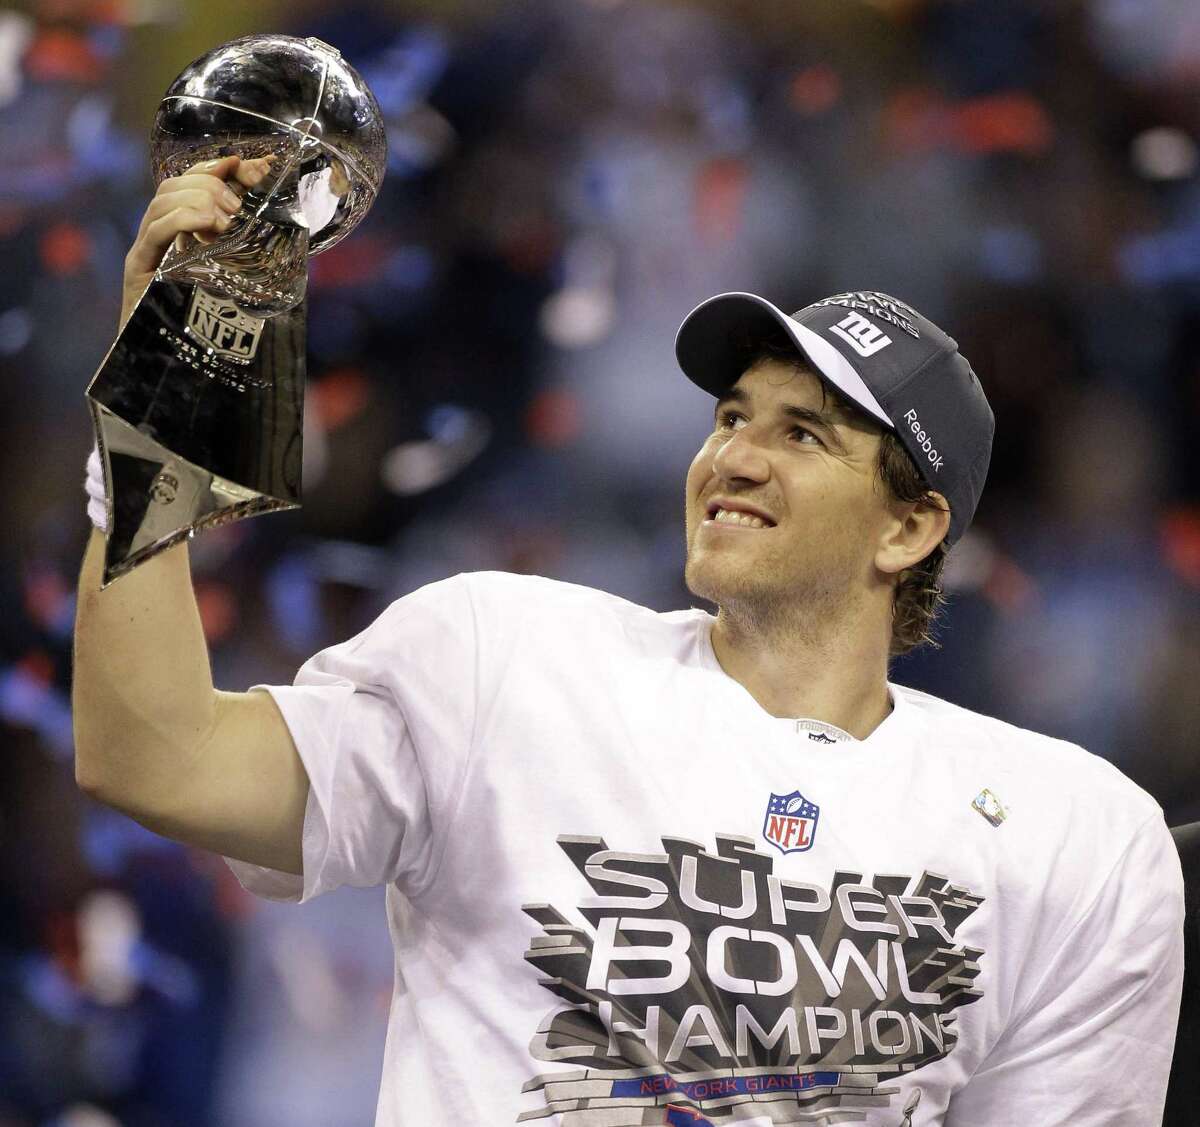 Giants win Super Bowl with 21-17 victory over Patriots